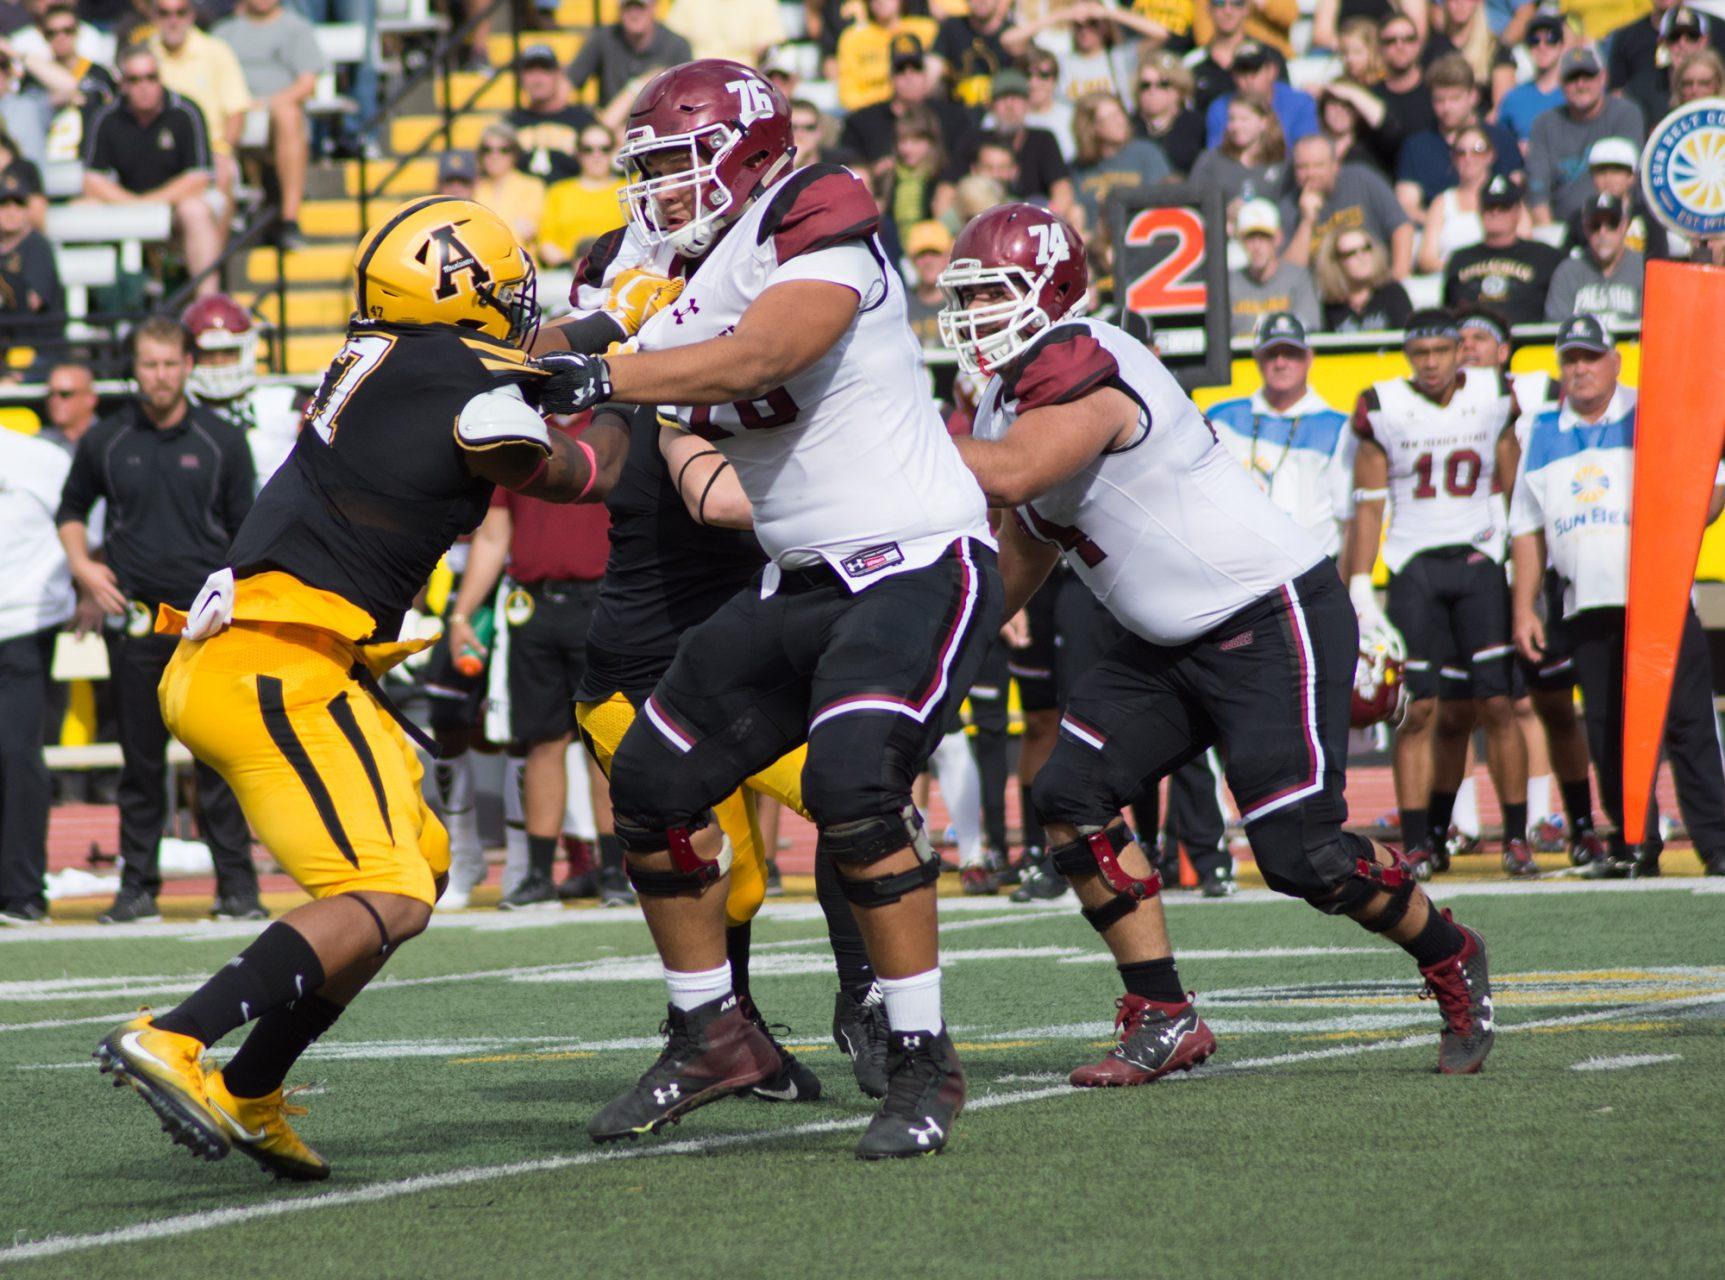 Defensive Lineman Okon Godwin battling the New Mexico State lineman at Kidd Brewer Stadium on Oct. 7. The Mountaineers won 45-31. 